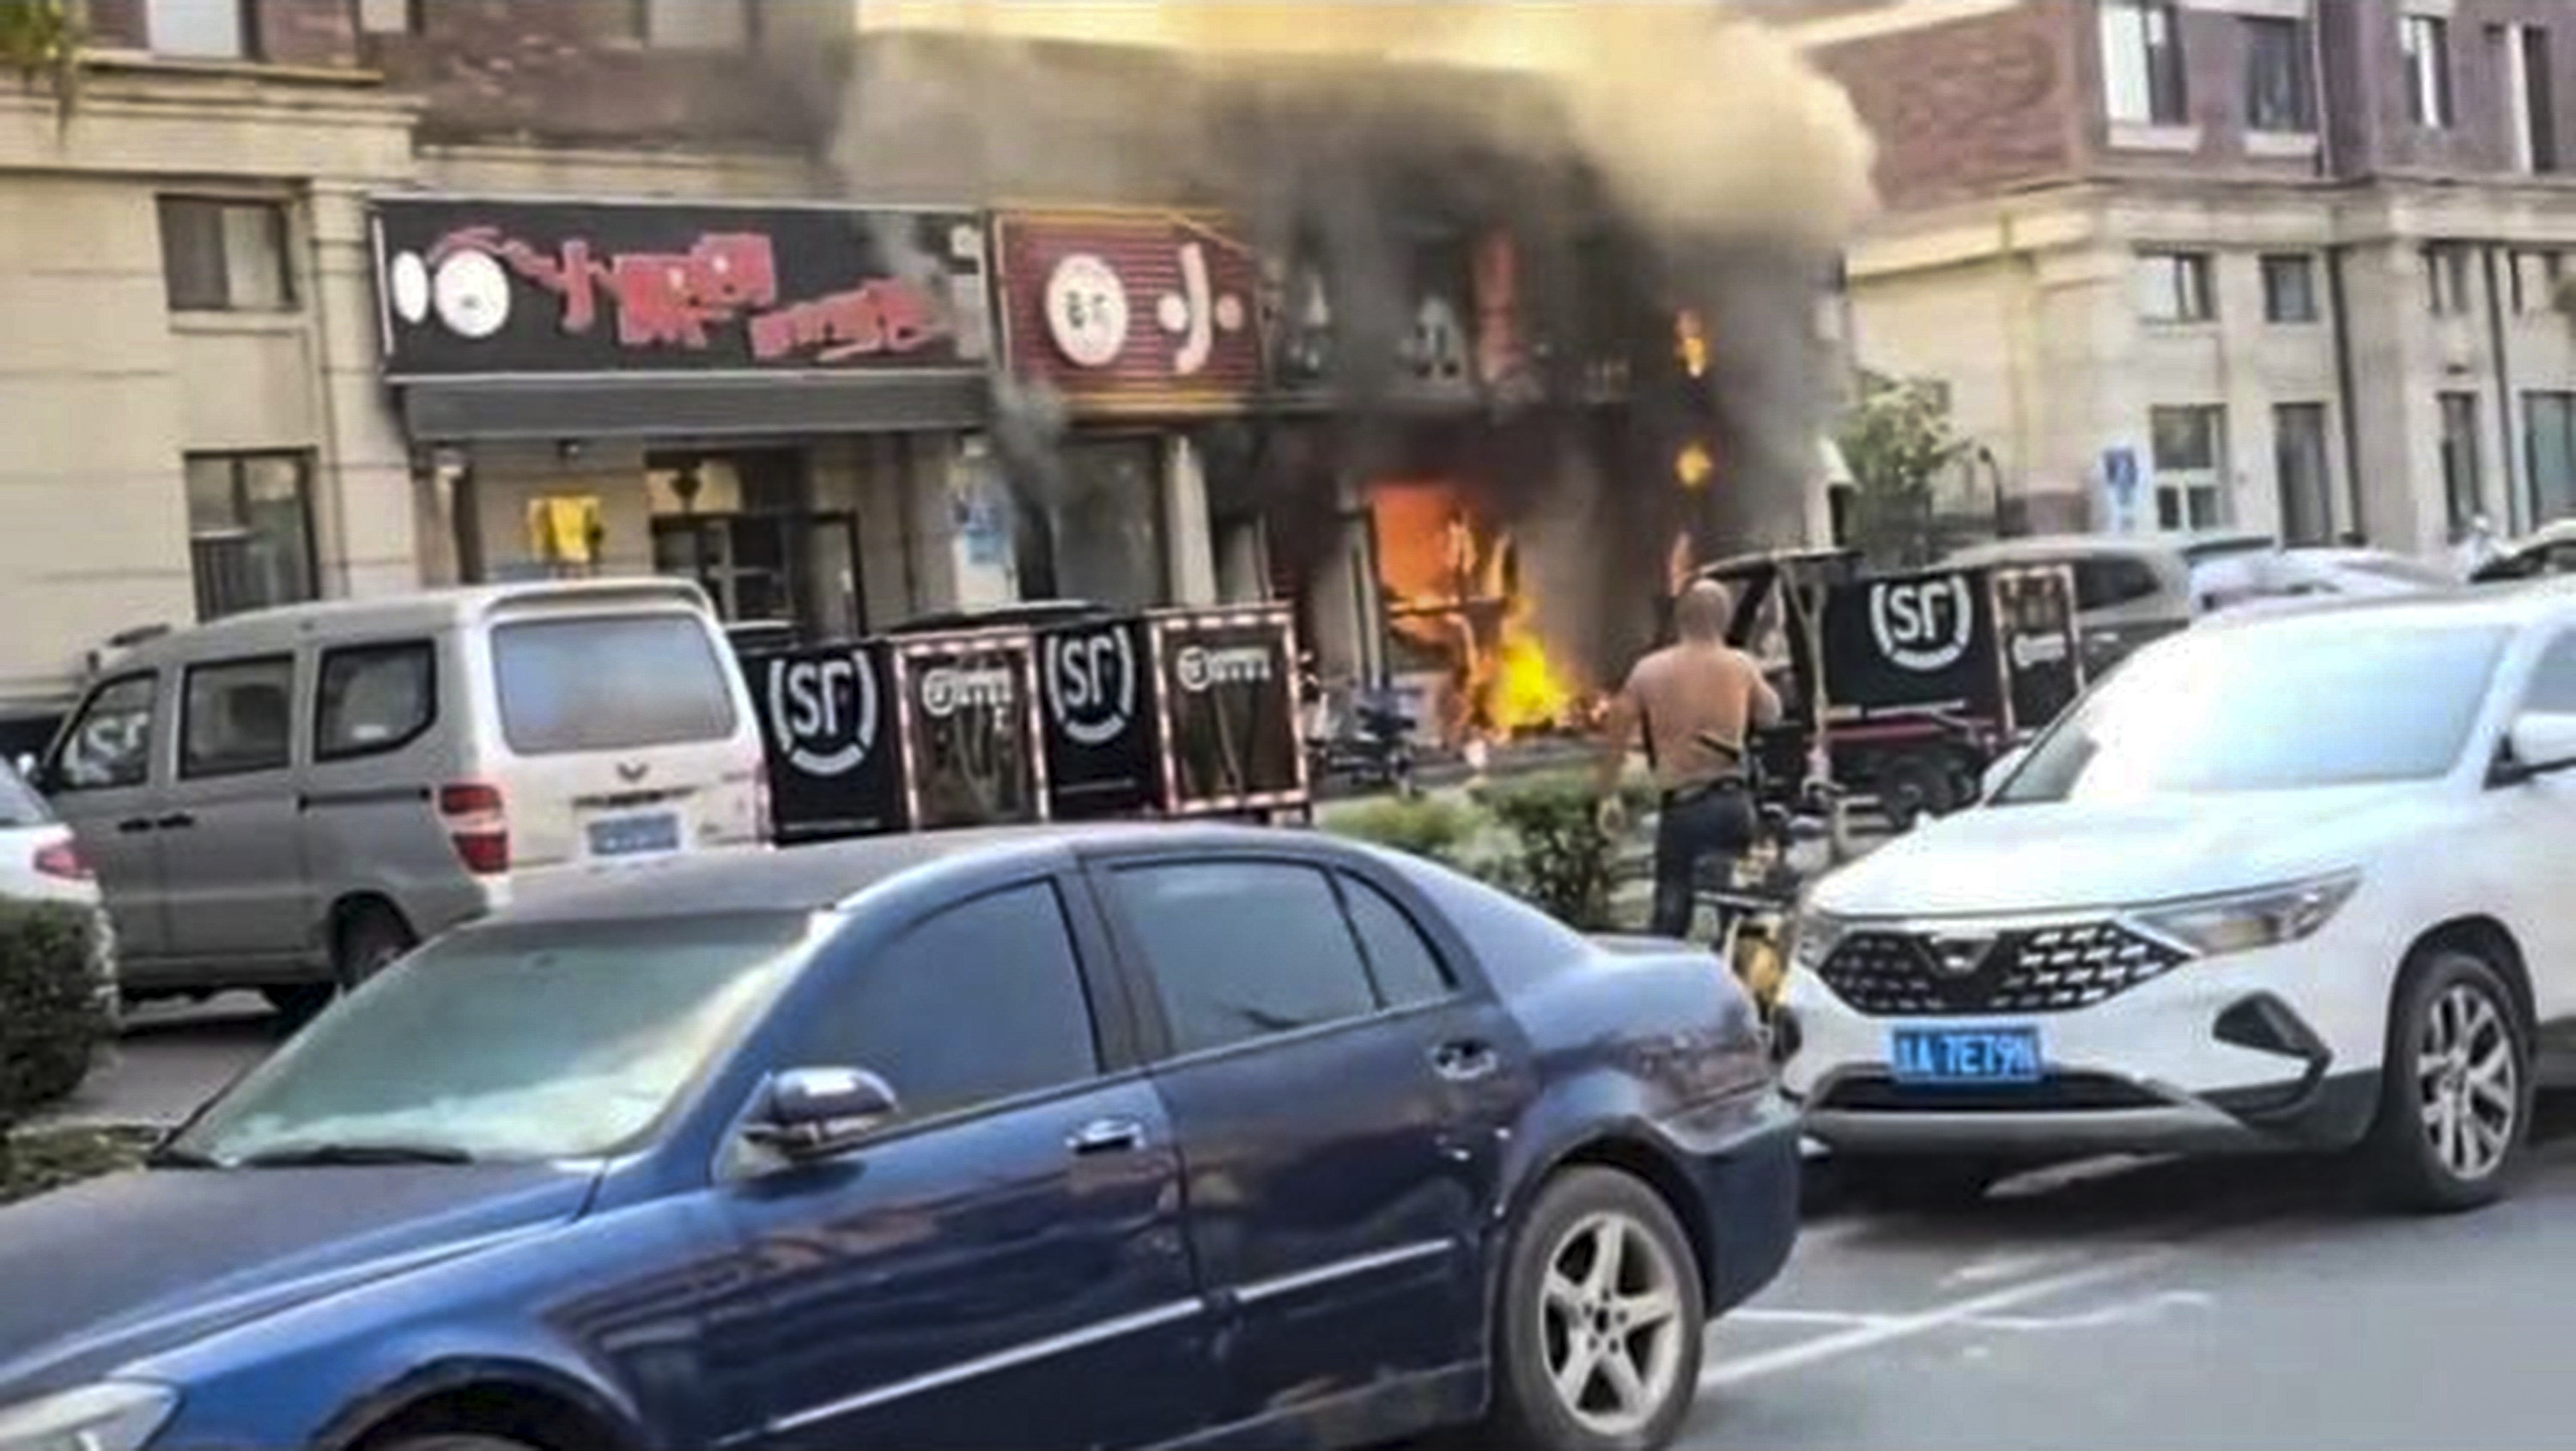 Video circulating on social media in China on Wednesday shows flames and smoke coming from the restaurant in Changchun, in the northeastern province of Jilin. Photo: Weibo